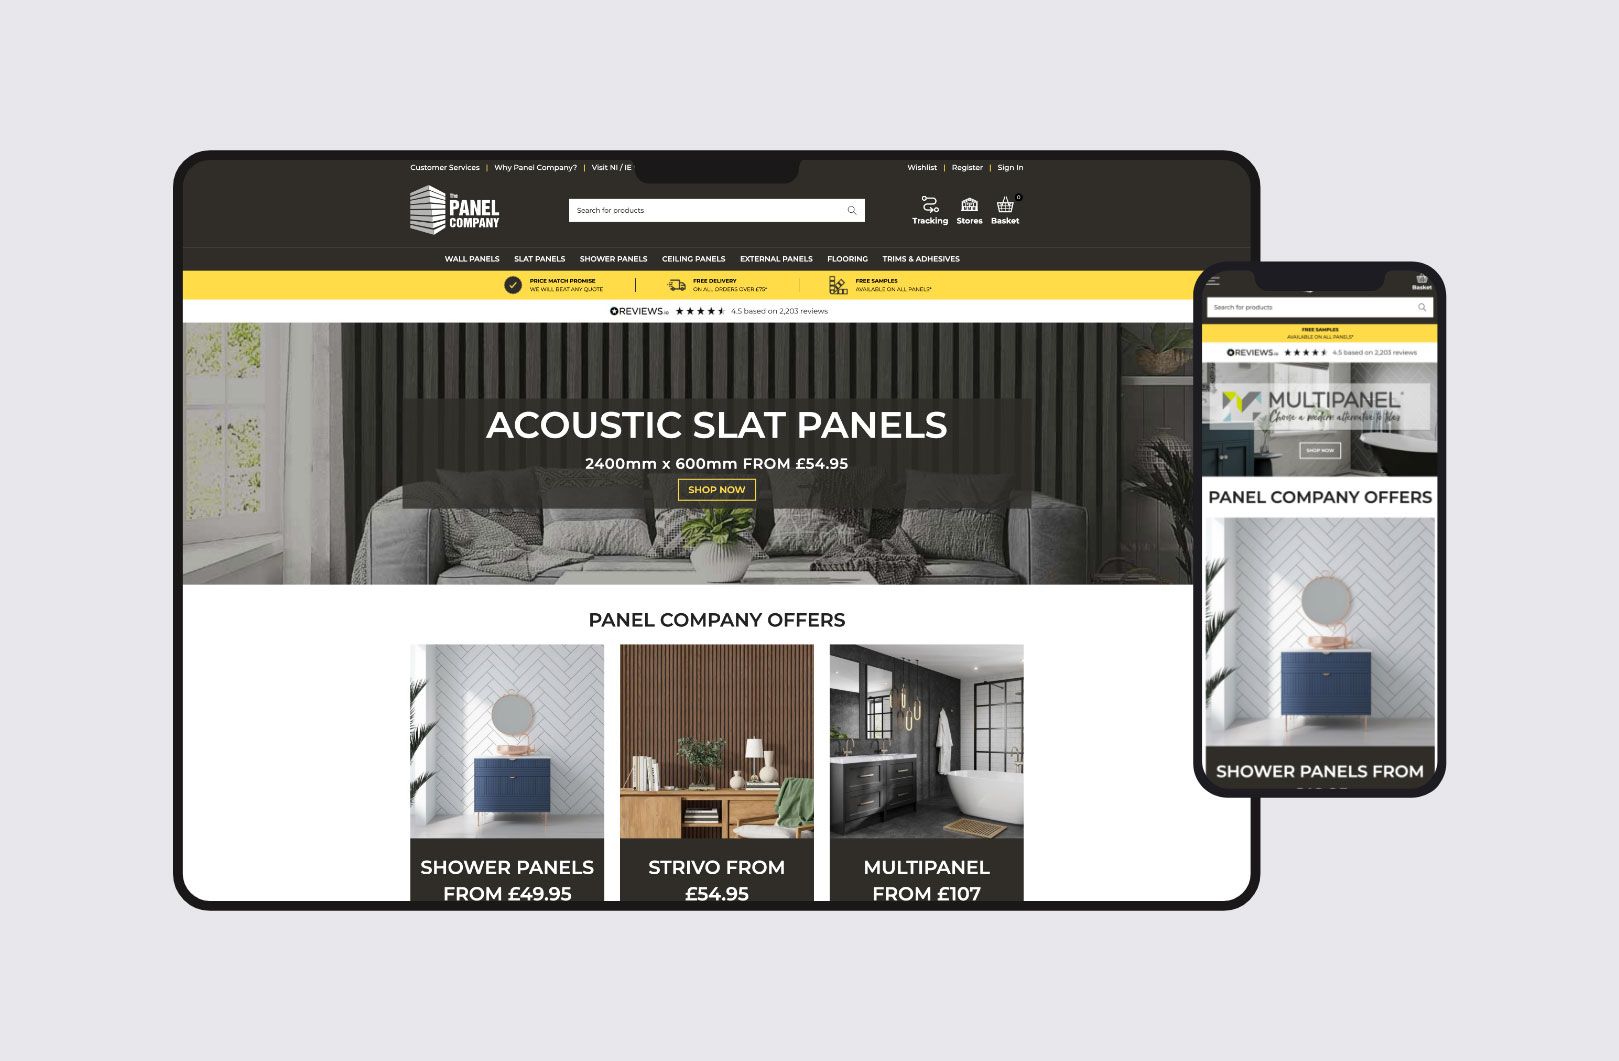 Panel Company website on desktop and mobile